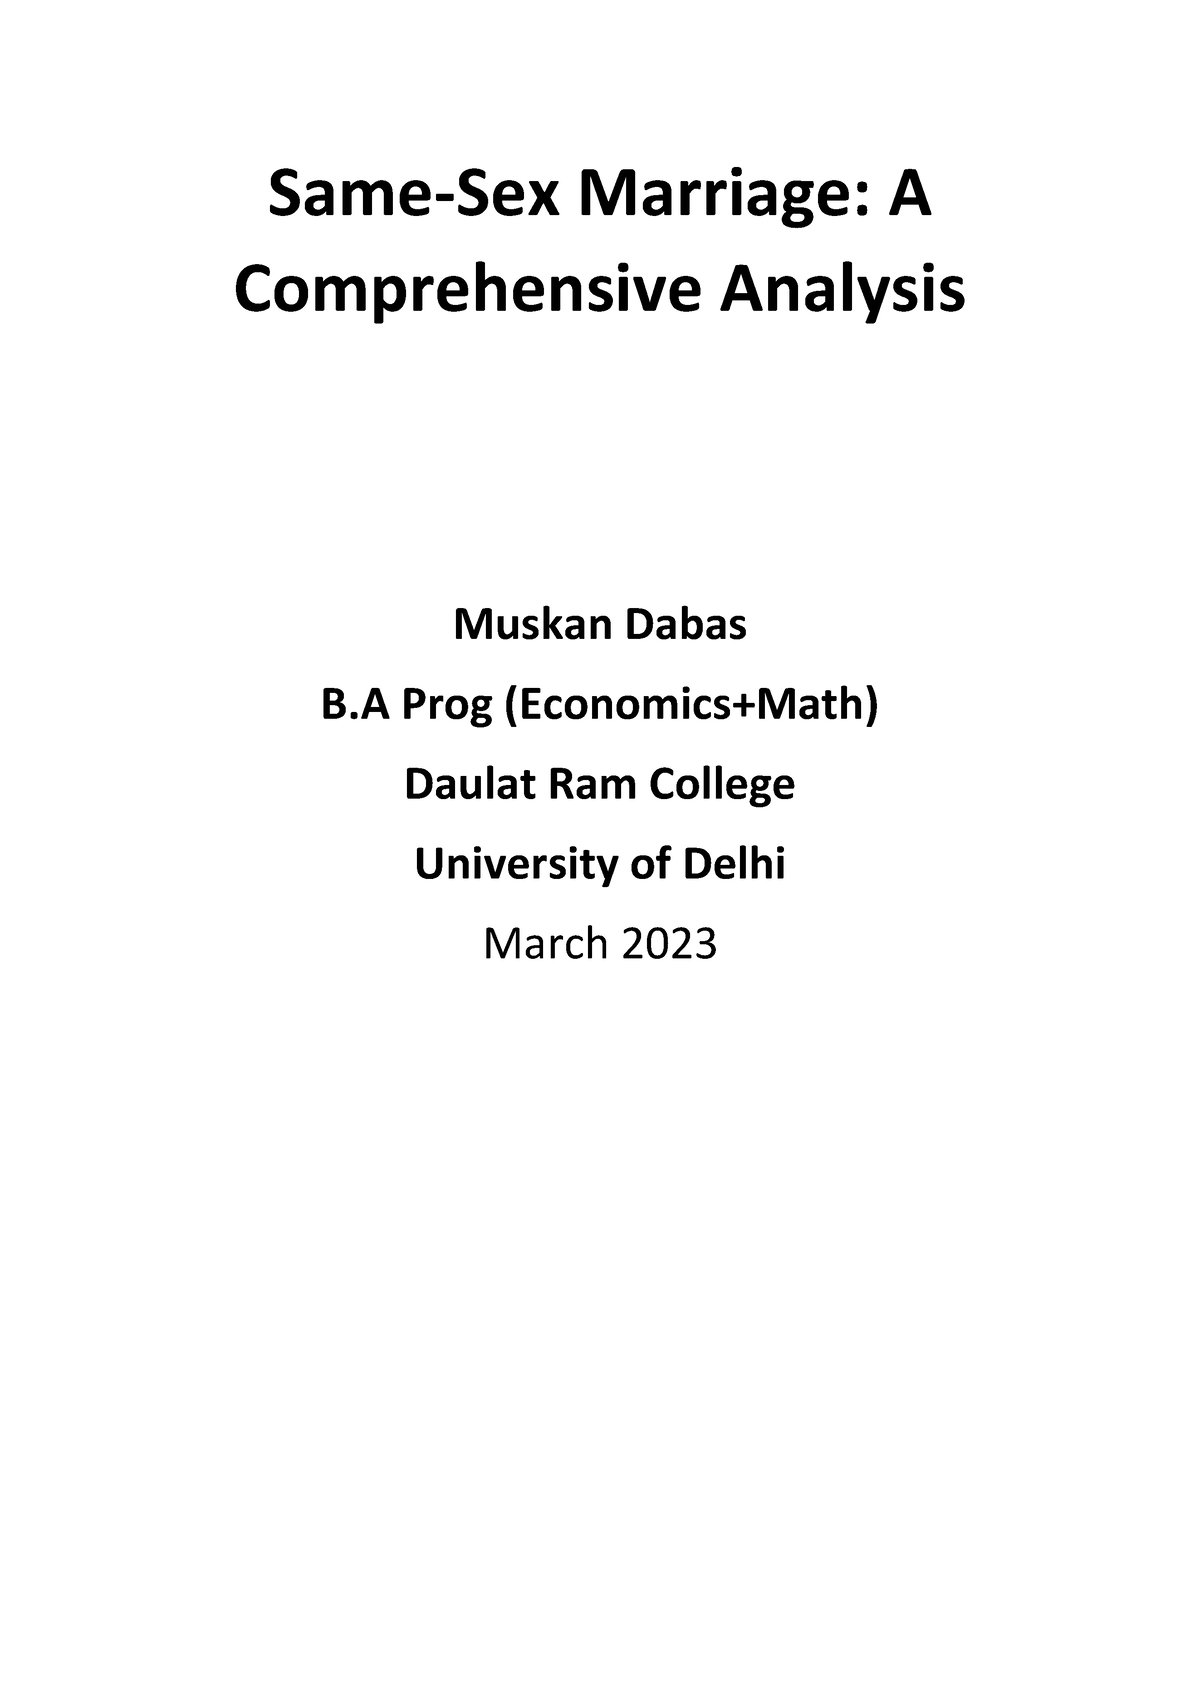 Research Paper On Same Sex Marriage1 Pdfffff Same Sex Marriage A Comprehensive Analysis 4817